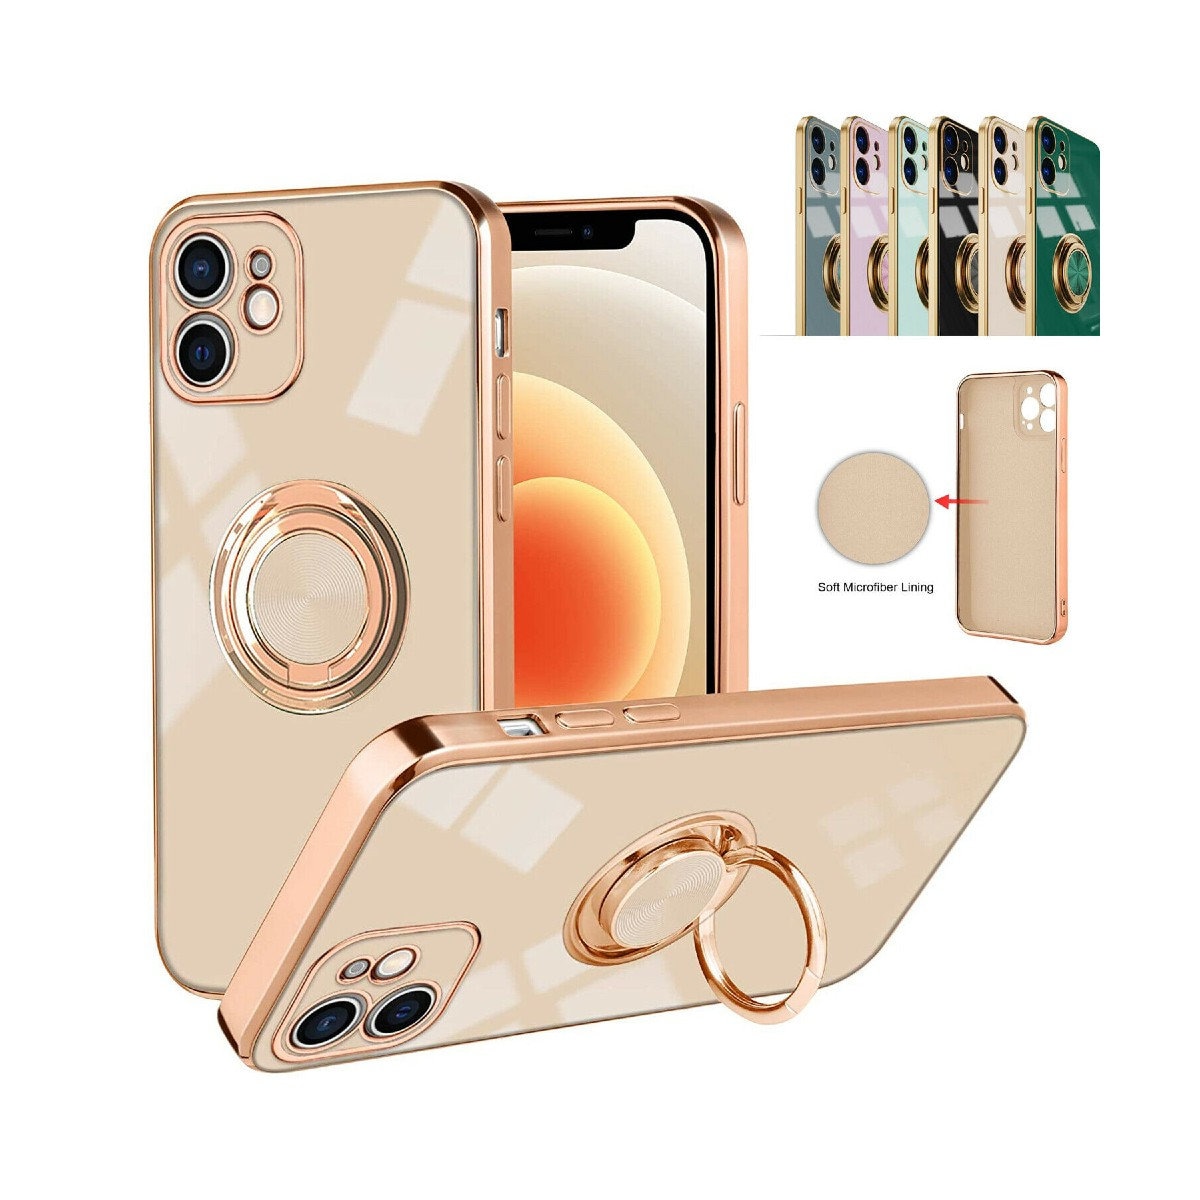 Silicone Pop Socket iPhone 13 Case - Caseface